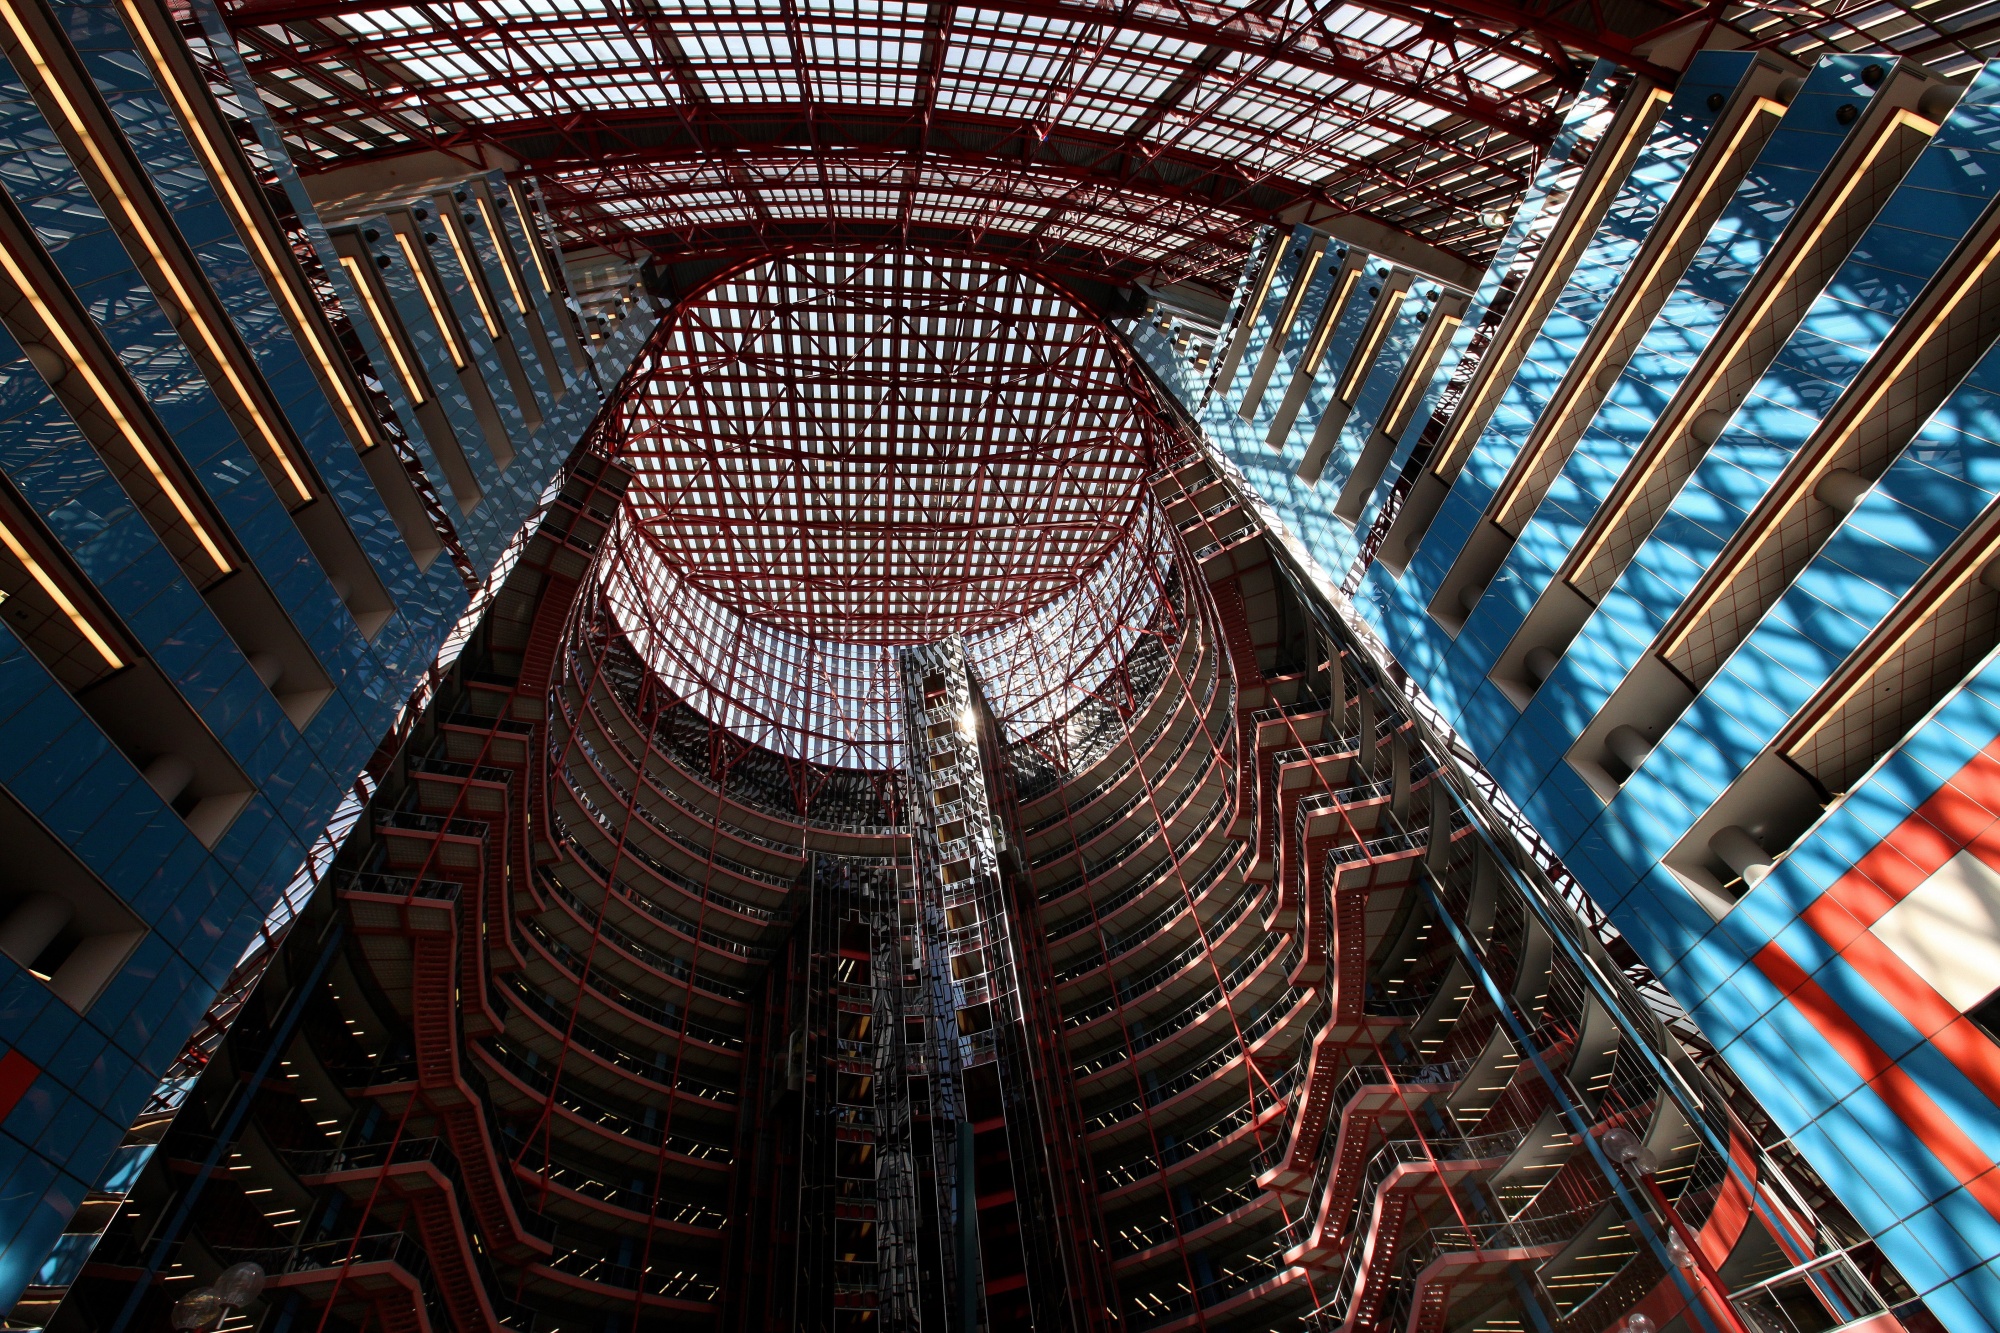 Dazzling But Troubled, Chicago's Thompson Center Gets a New Look